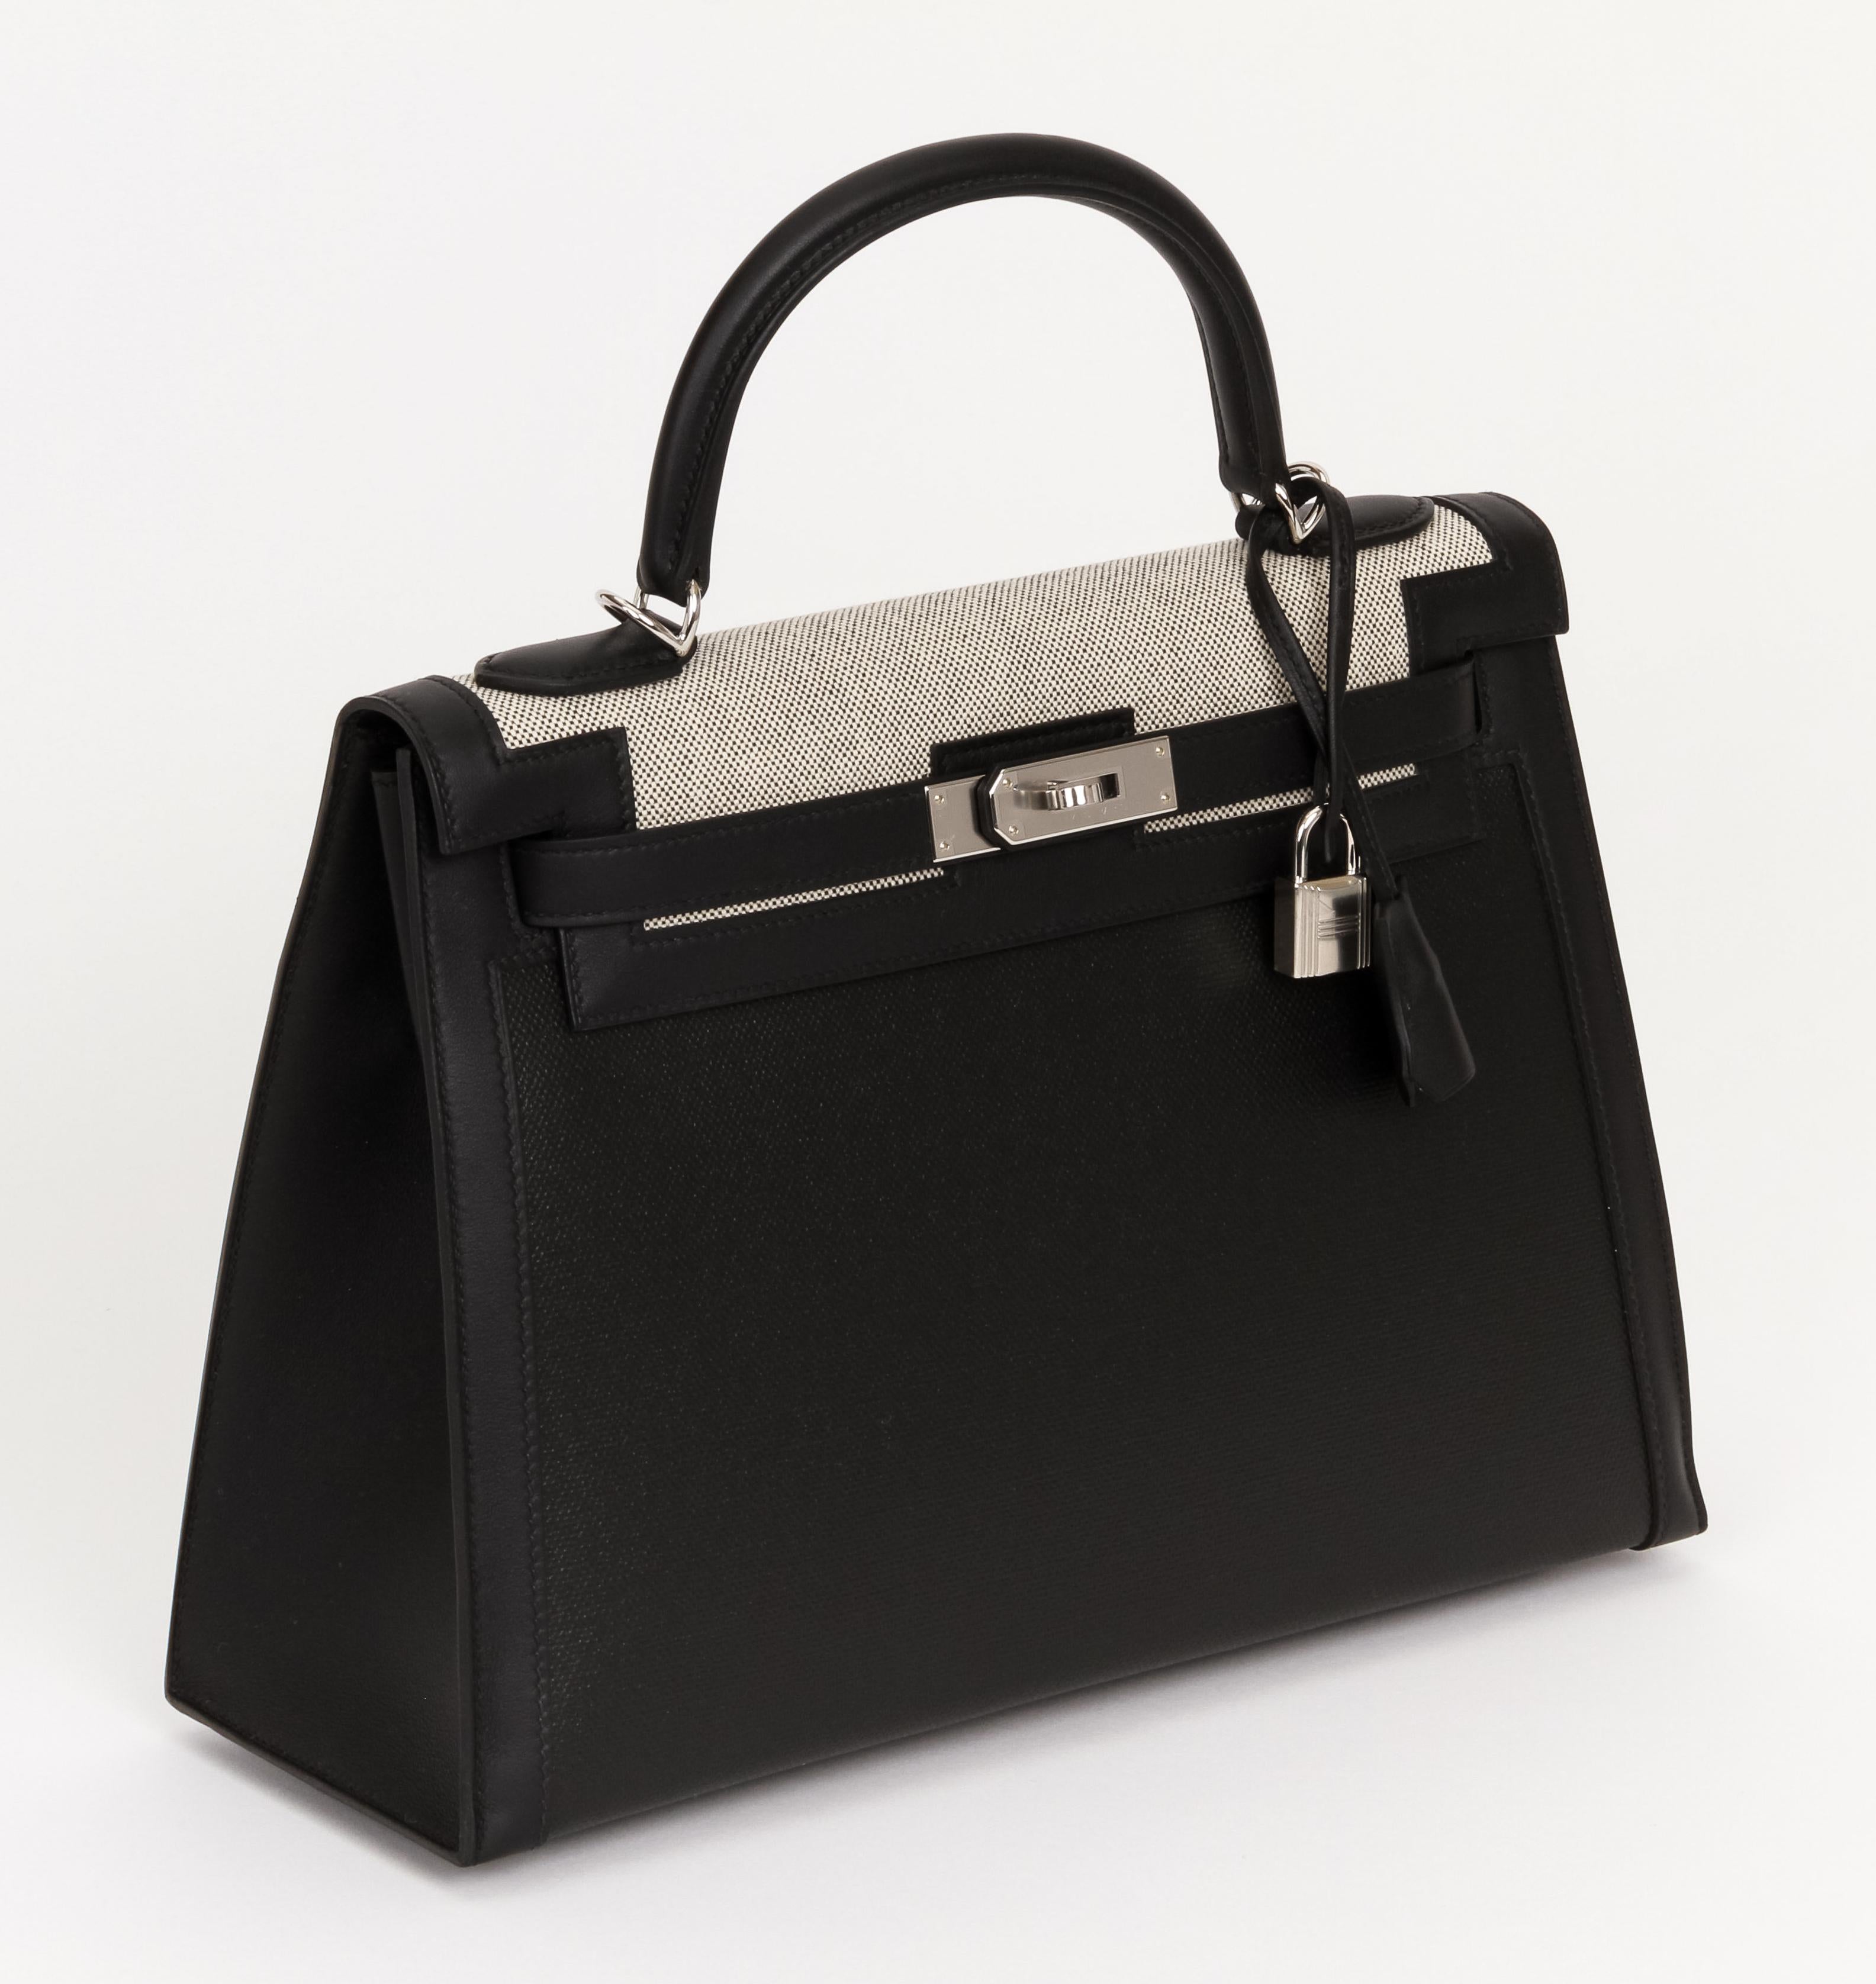 Hermes one of a kind currently for sale Kelly II sellier Berlin, ecru toile and black swift leather. Palladium Hardware. Specially coated black toile, very durable and lightweight. Letter Z for 2021. Brand new in box. Comes with strap, clochette,